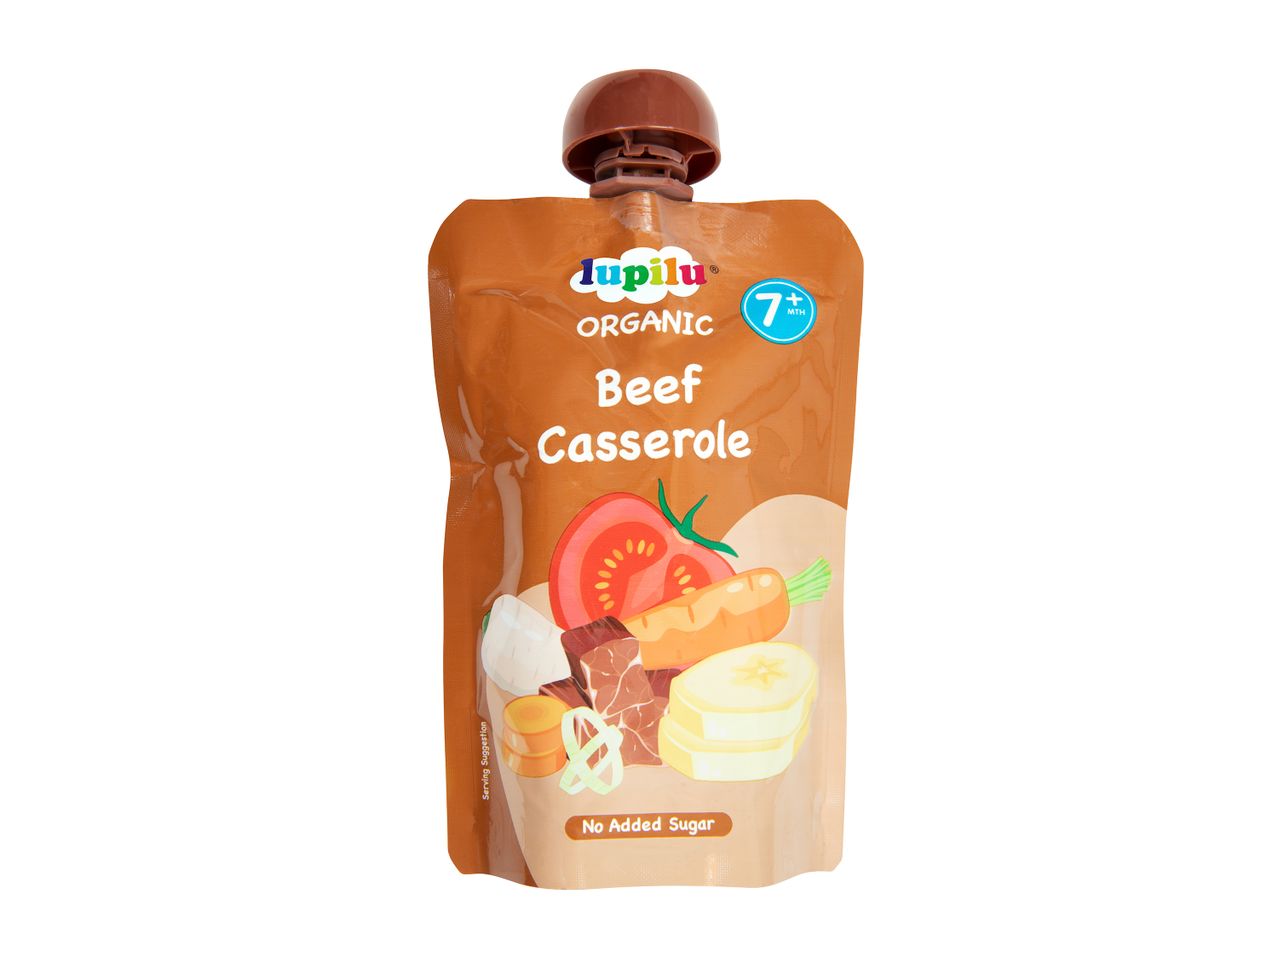 Go to full screen view: Lupilu Organic Savoury Pouches Beef Casserole - Image 1